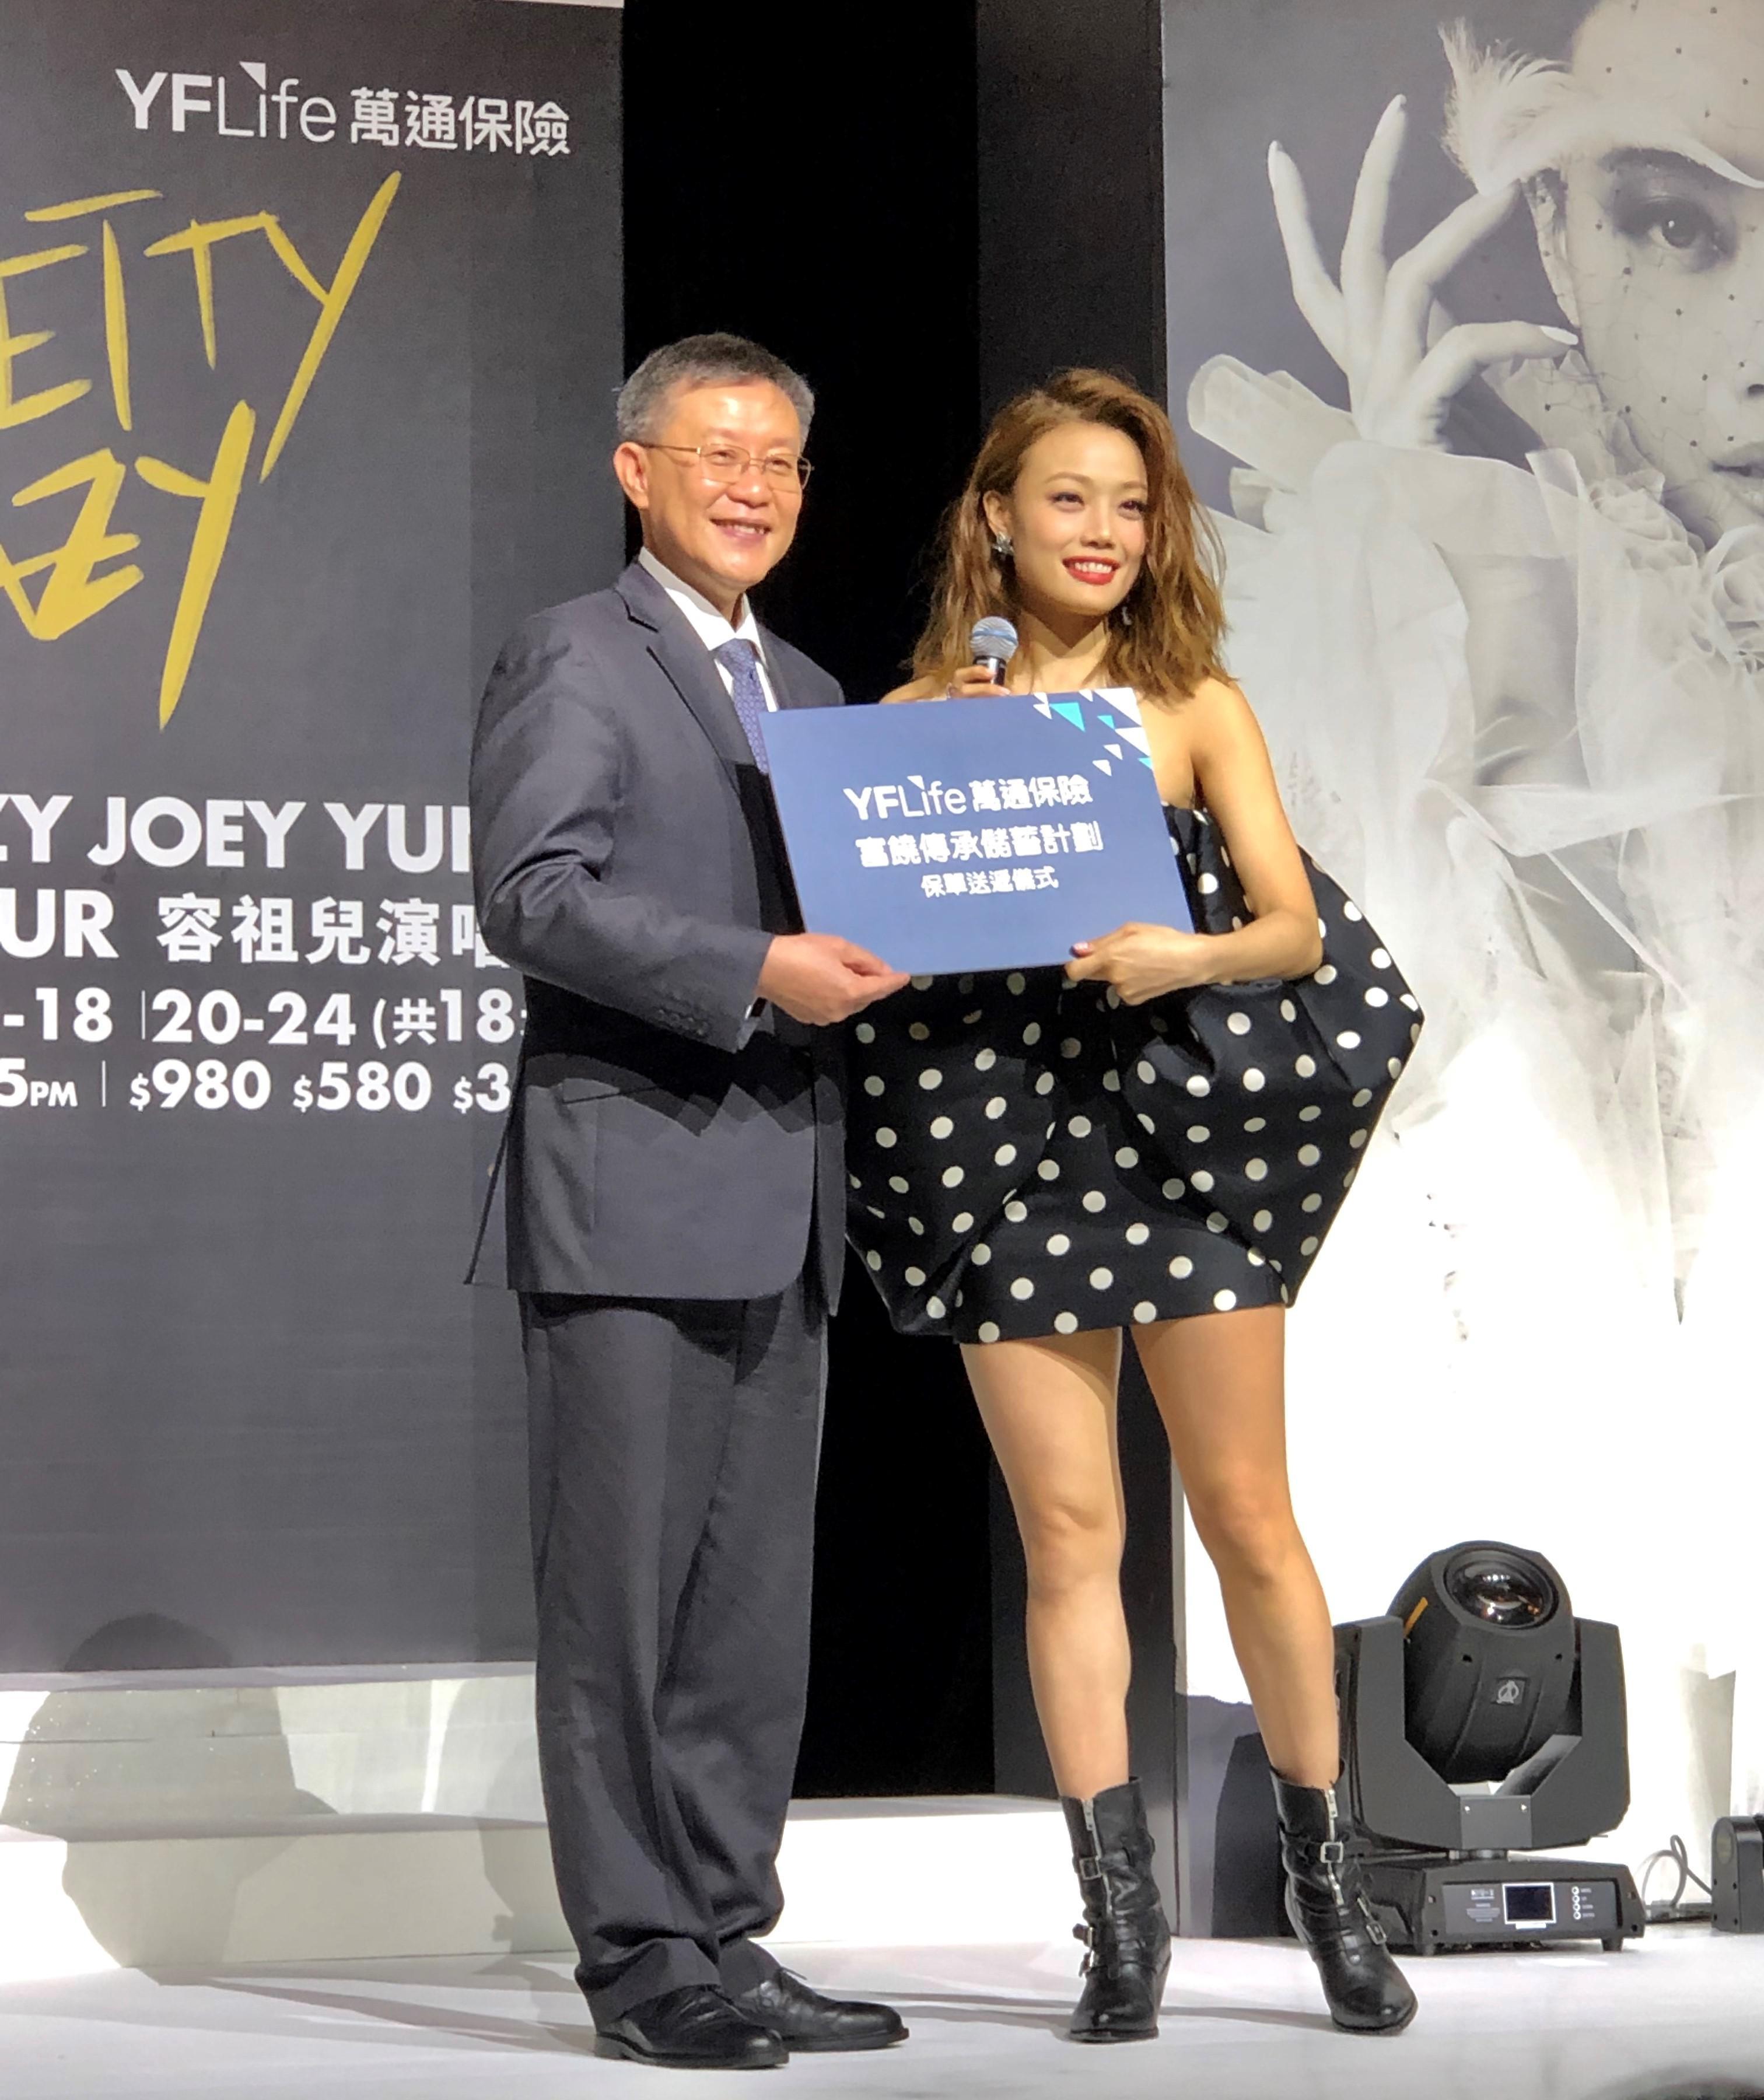 Mr. K. P. Tay, Managing Director and Chief Executive Officer of YF Life, presents an Infinity Saver policy to Joey, congratulating her on the 20th anniversary of her debut, and wishing her complete success on her upcoming concert tour.